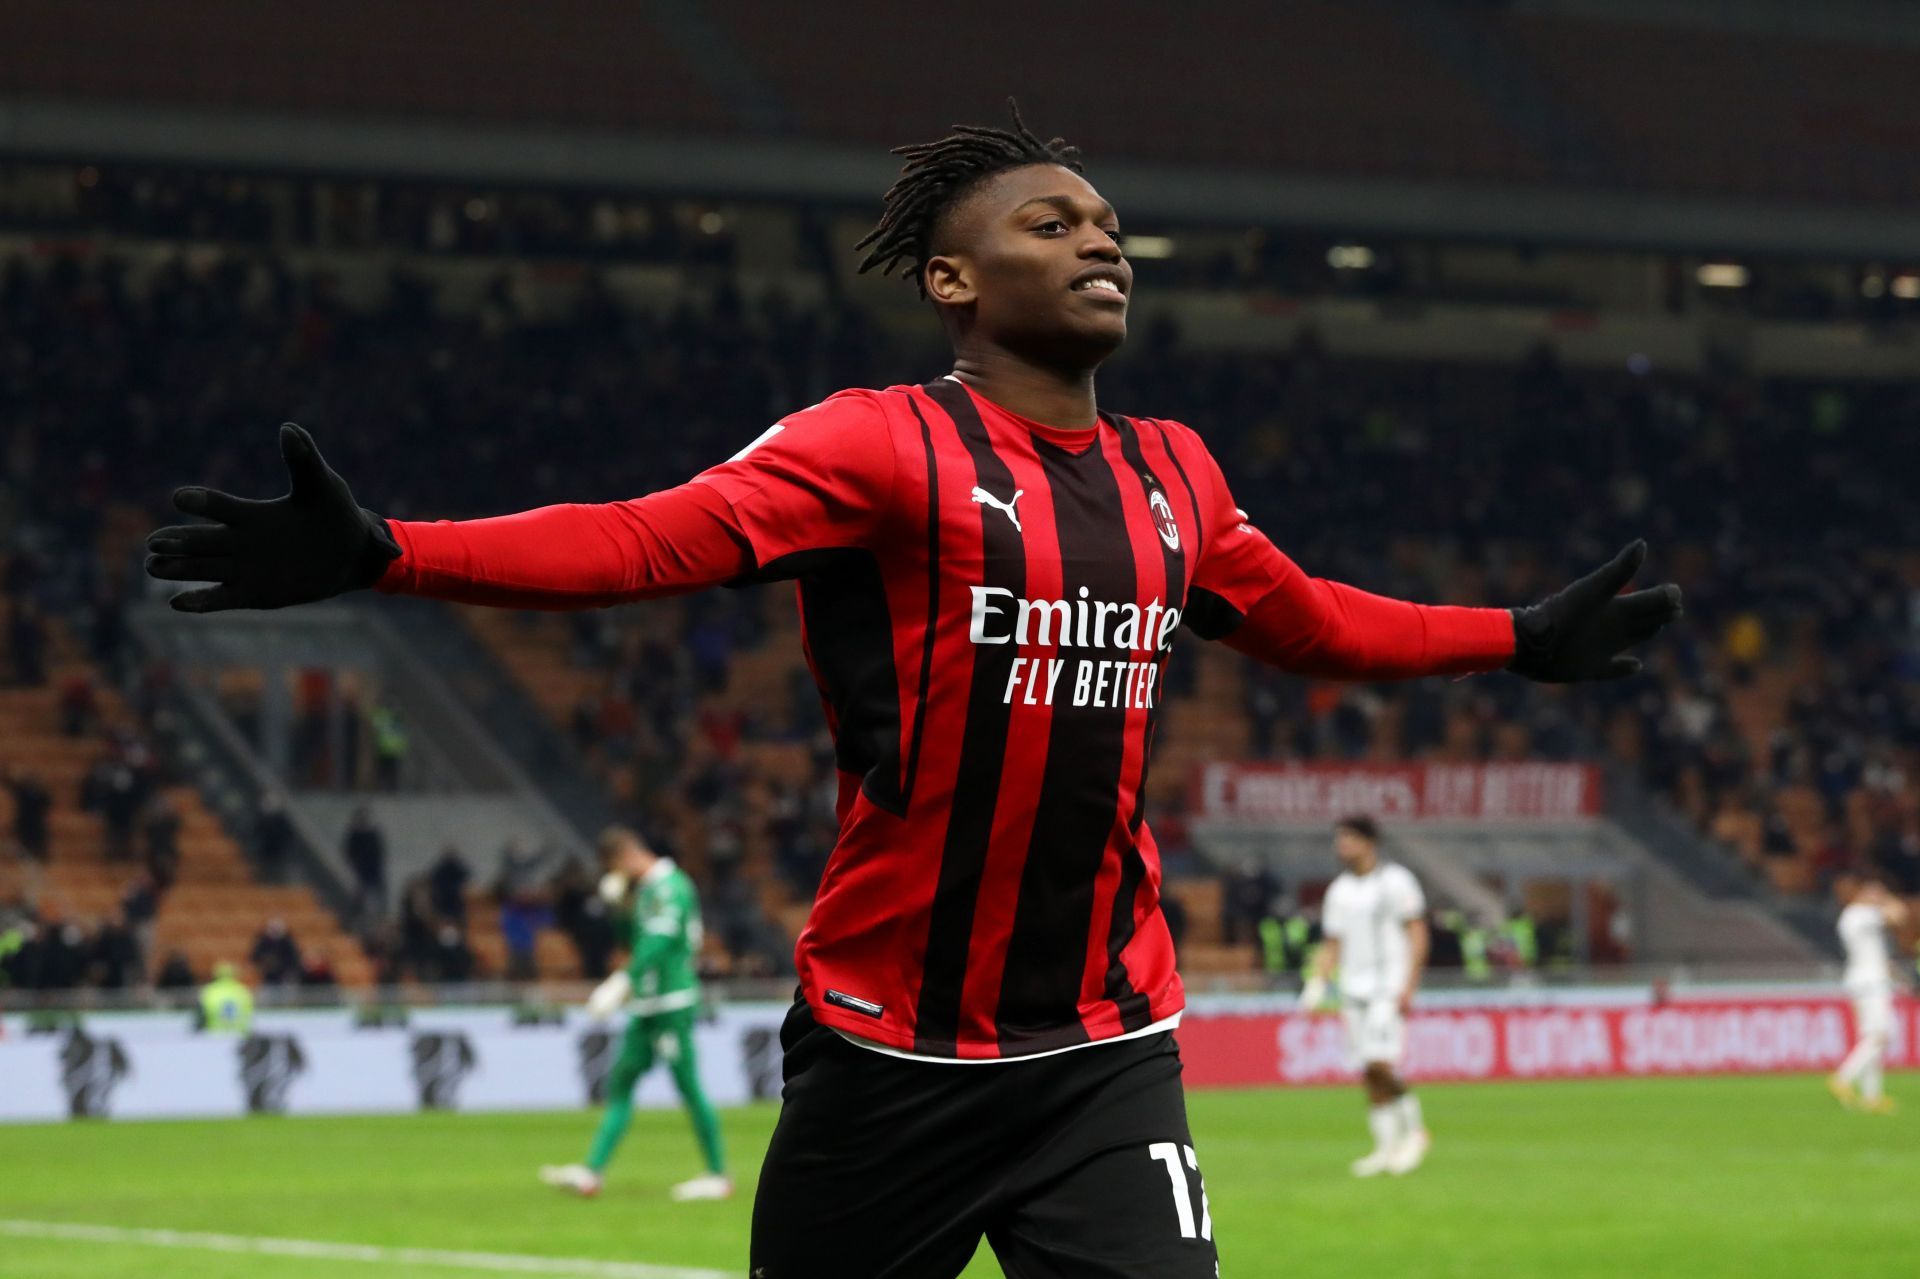 Rafael Leao has been a solid performer for Milan.